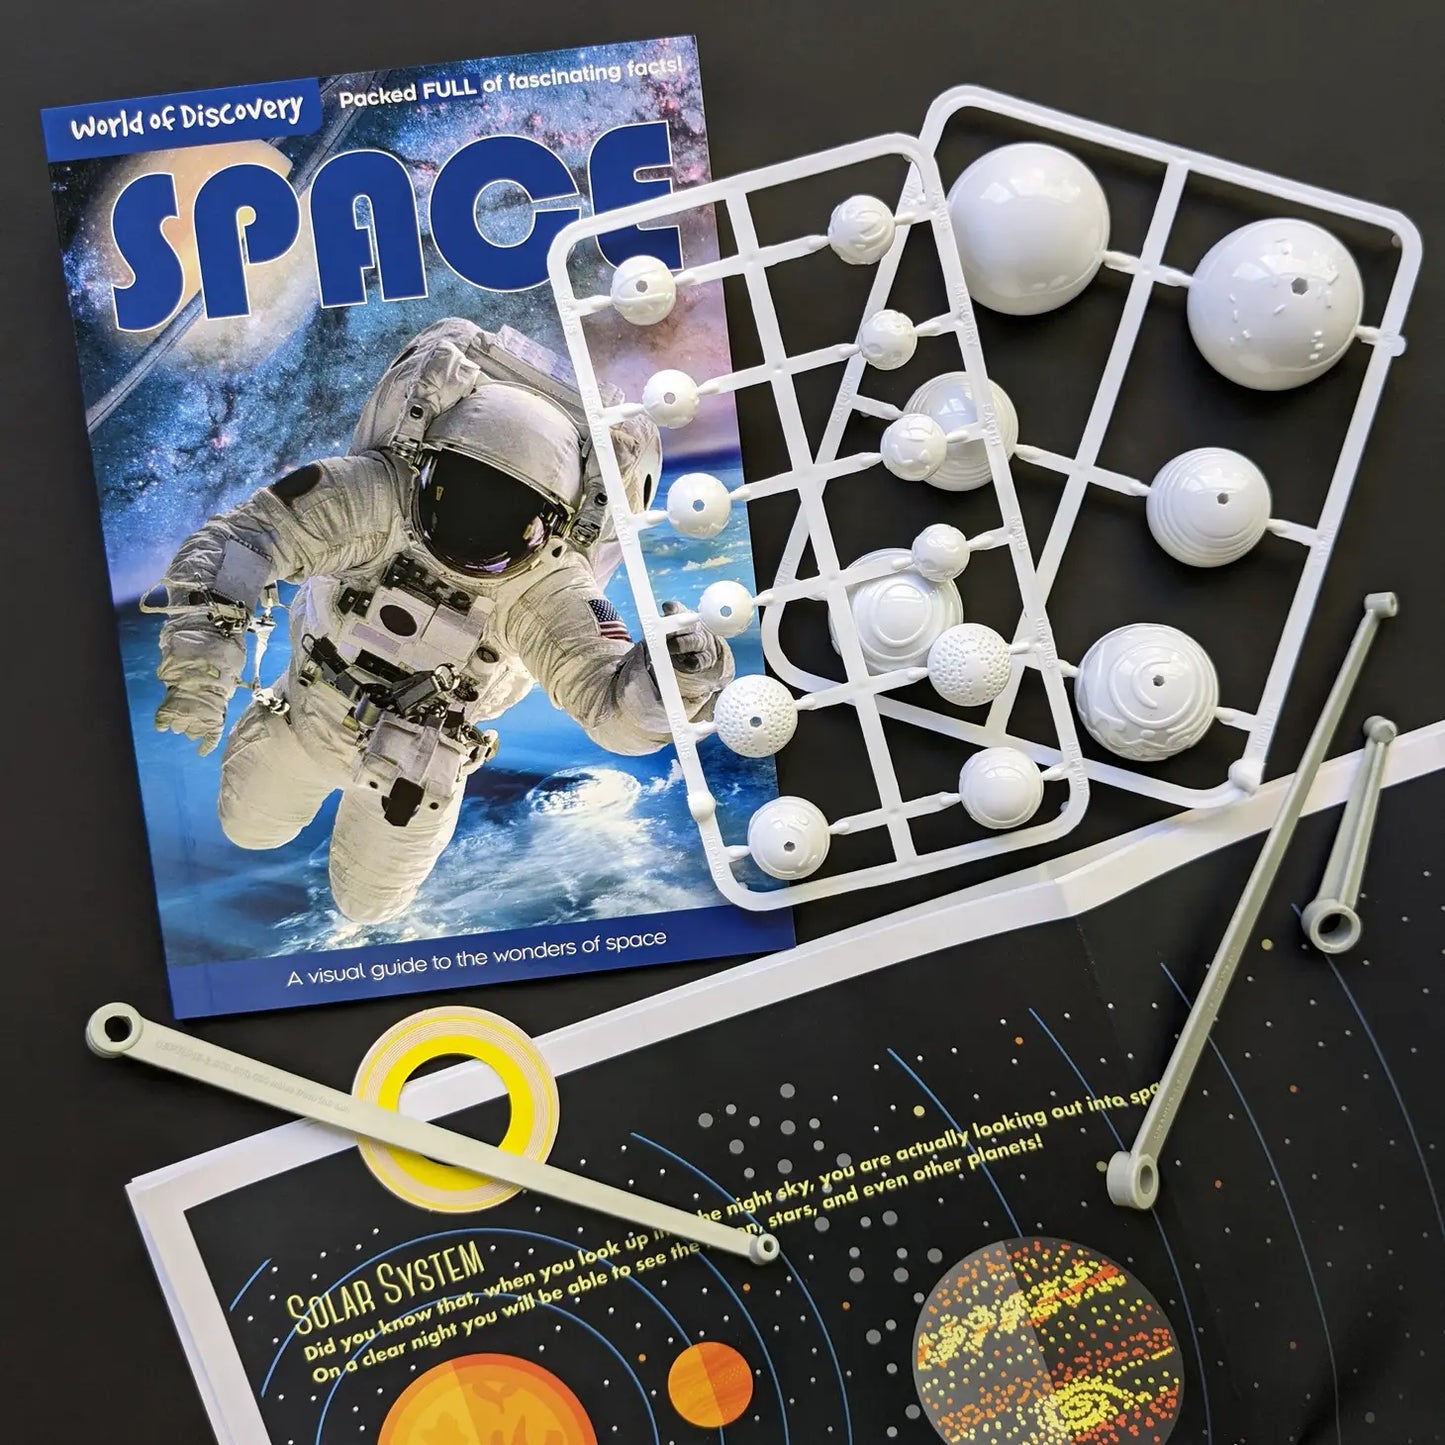 World of Discovery Space Educational Box Set